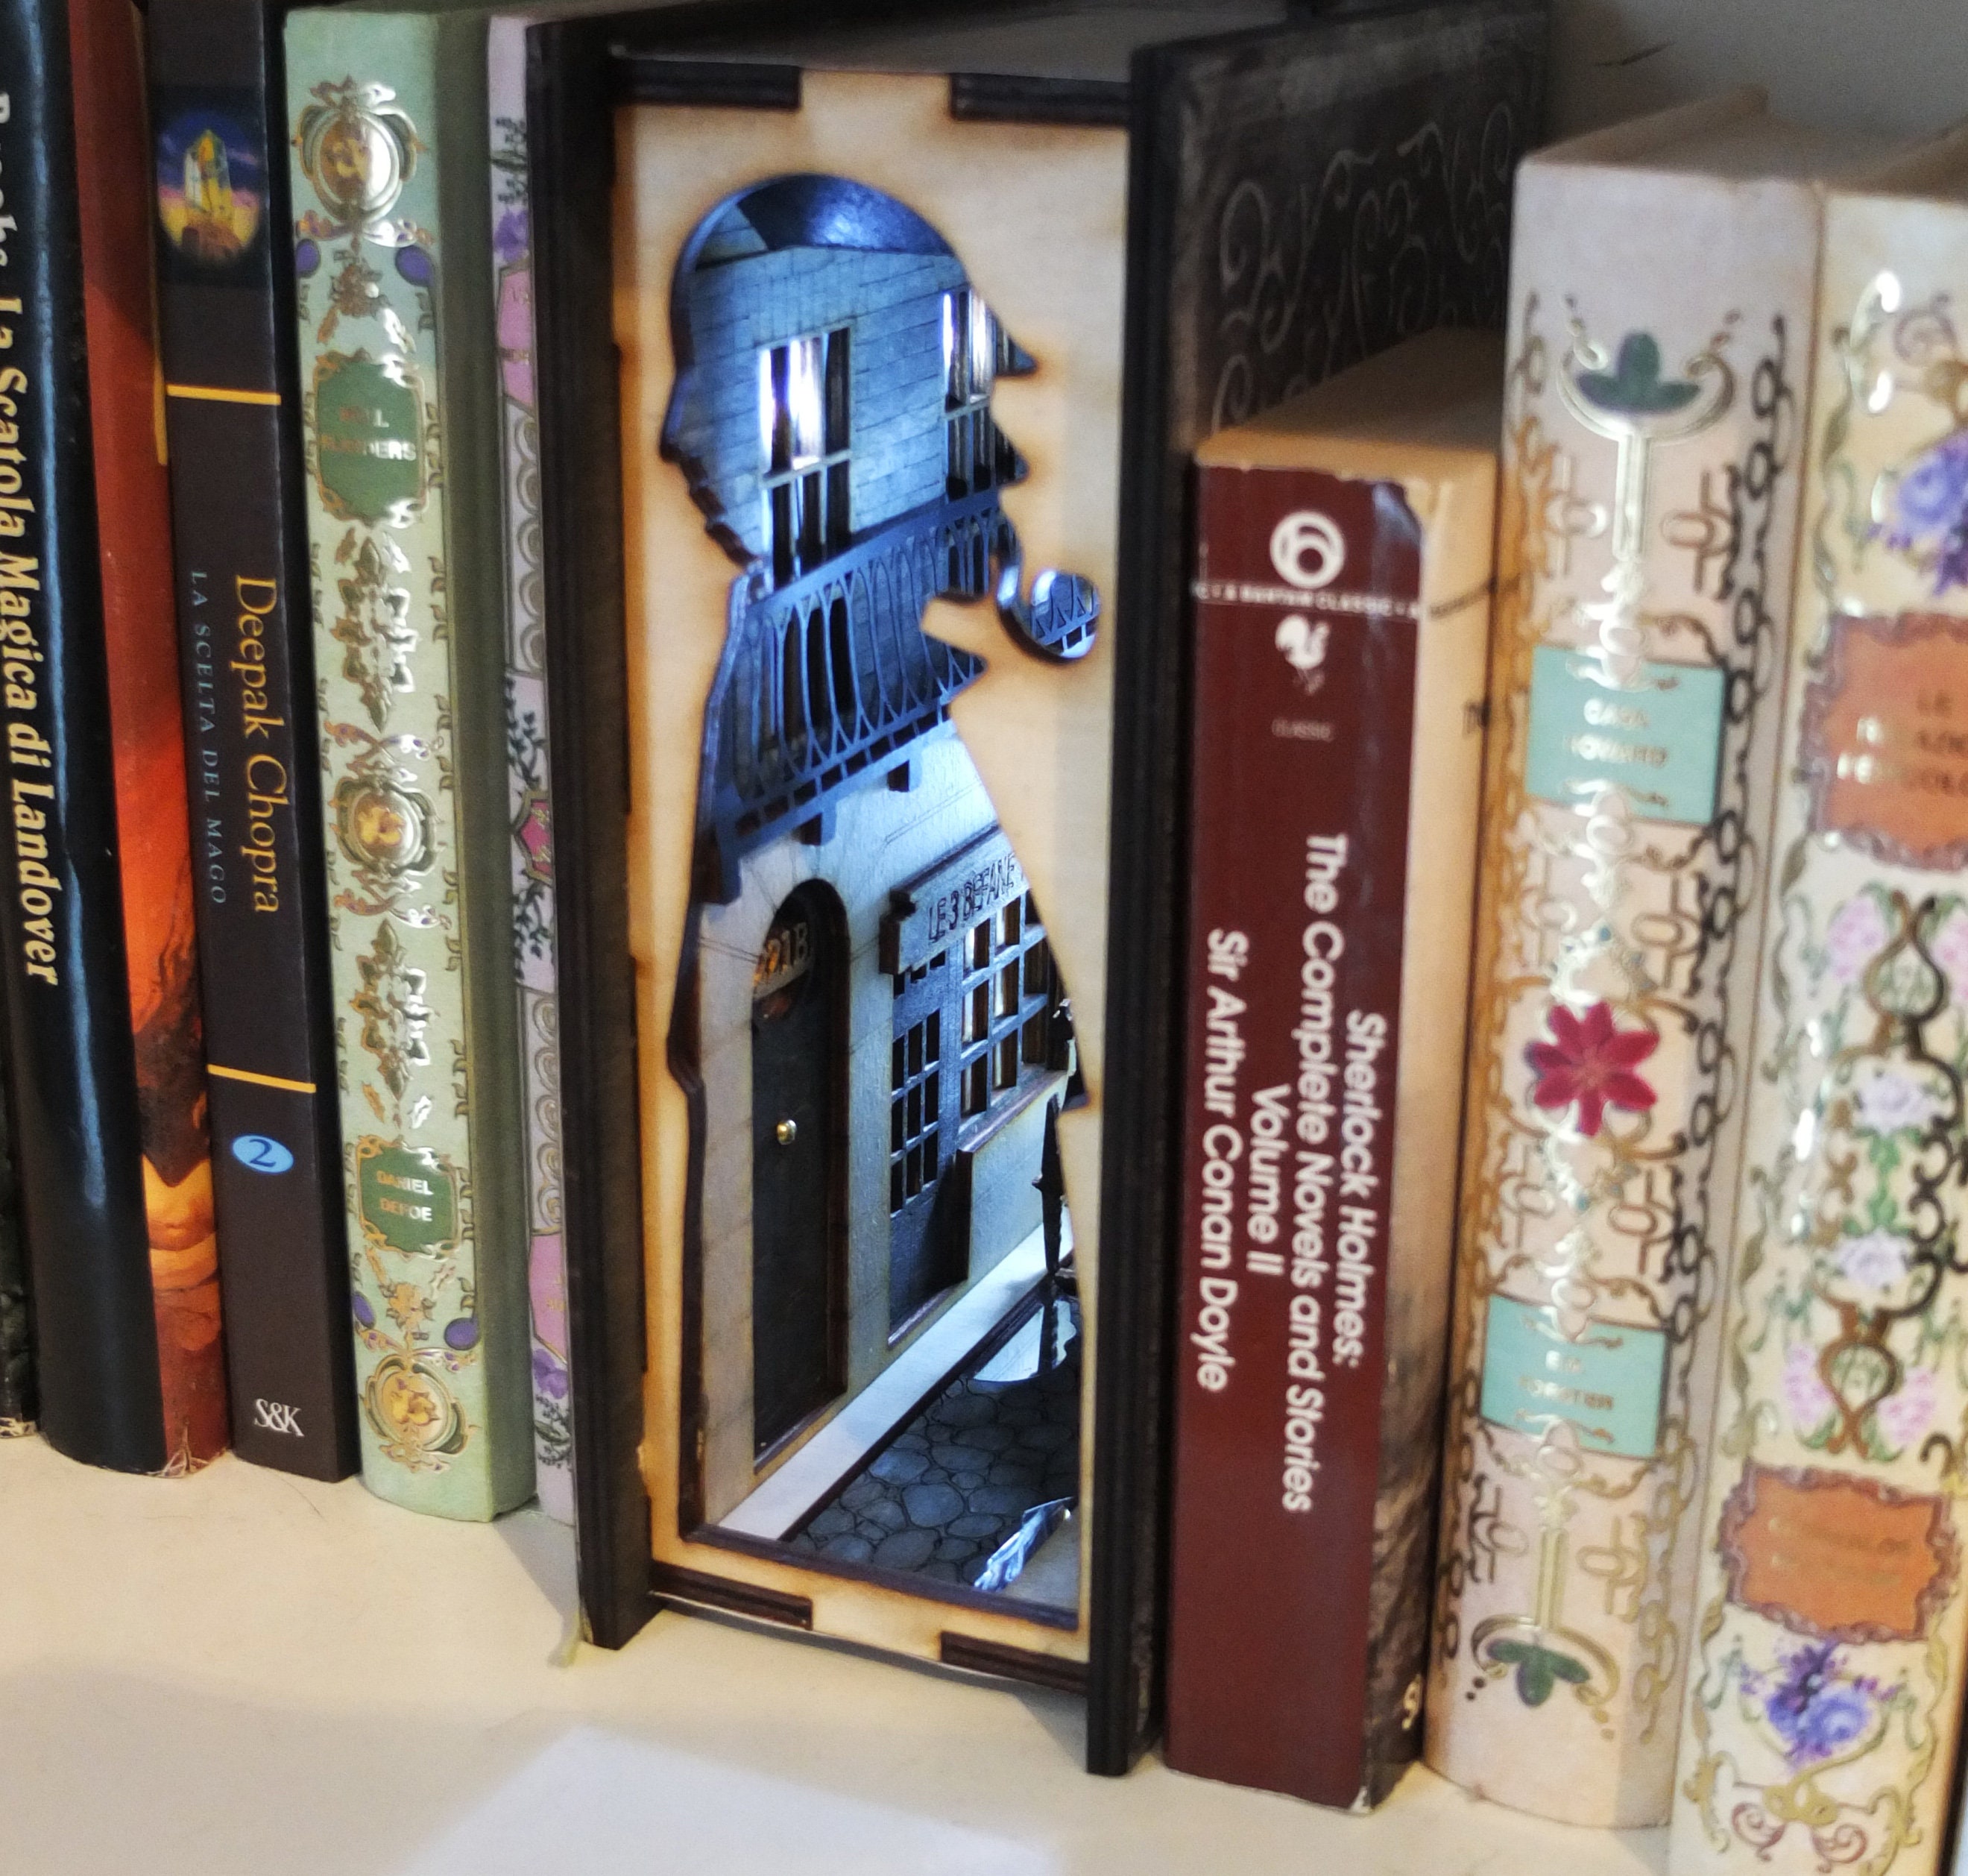 Famous Detective Agency Book Nook Kit - Qjtsdwp